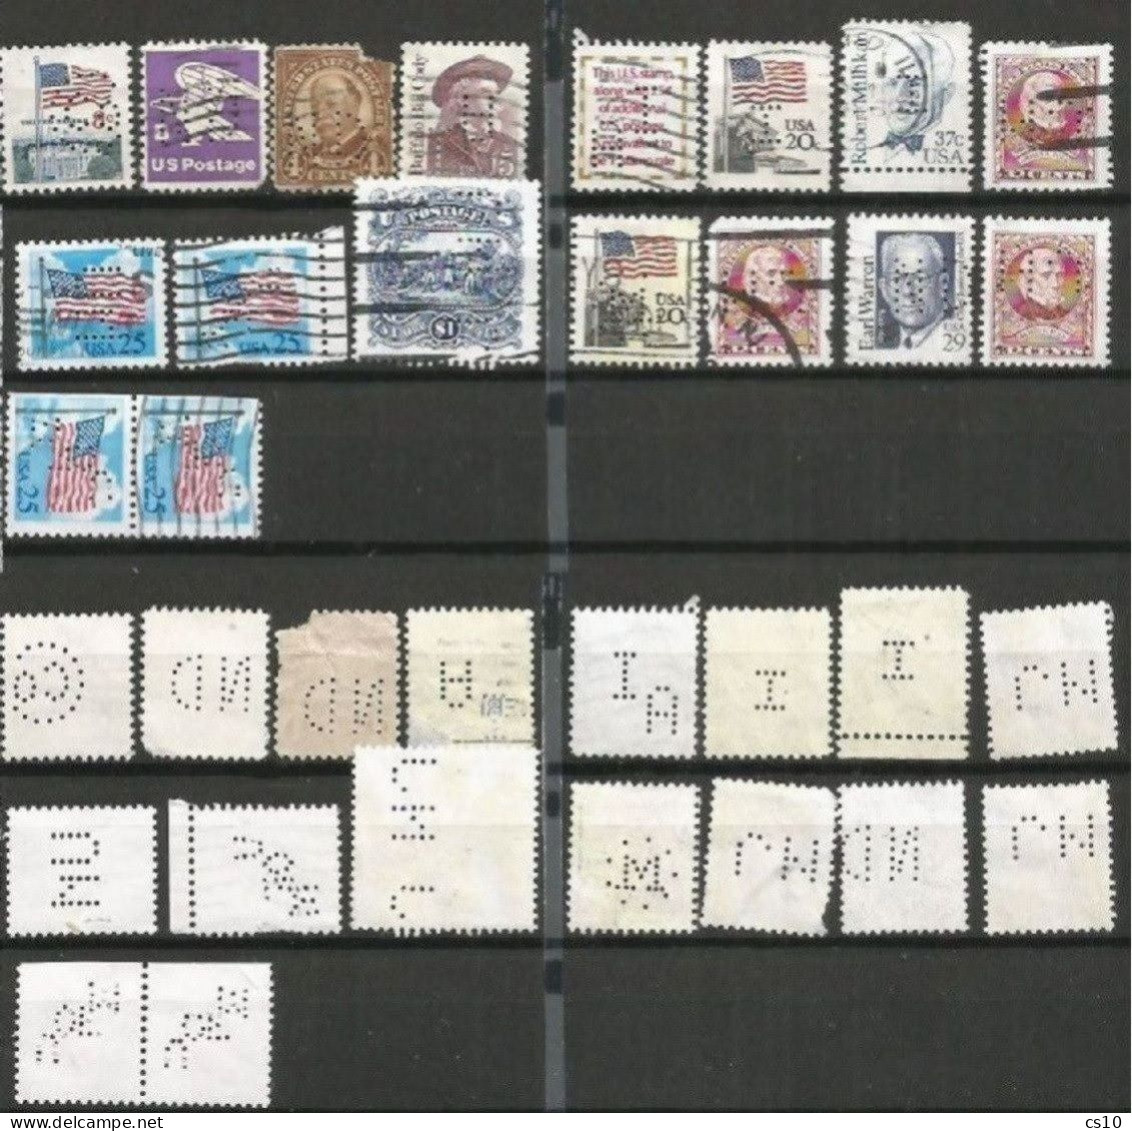 USA Perfins Small Lot Of 130 Pcs 7 Scans Incl. PPC Iowa University And Some Piece Incl. Stationery7 - Perfins